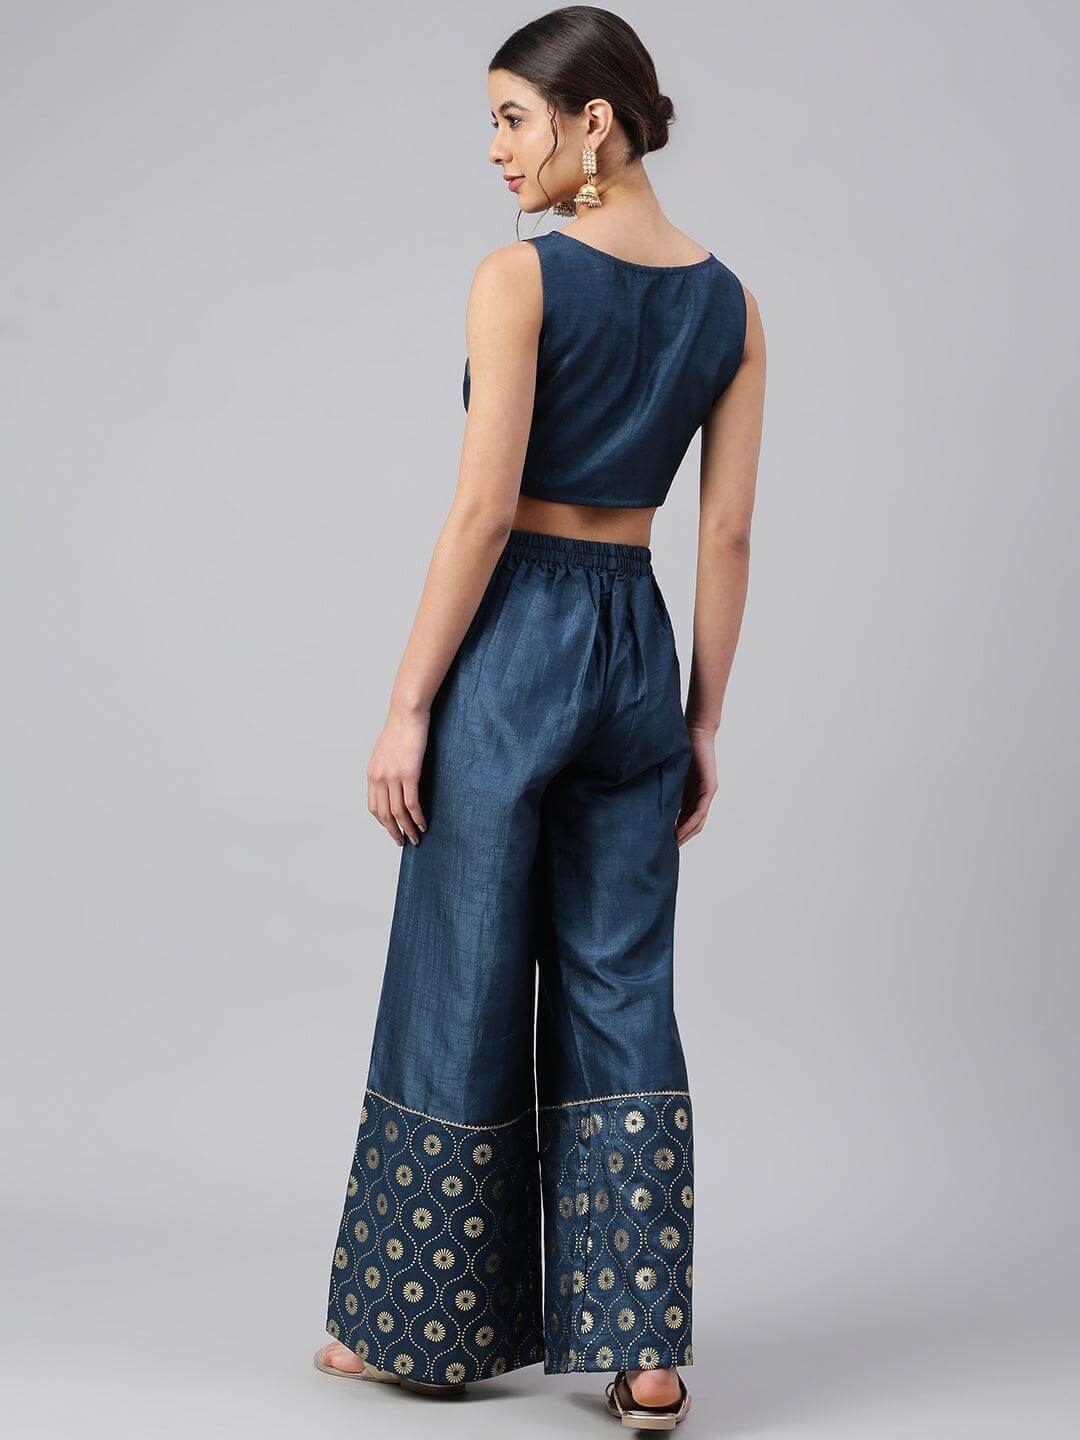 Denim High Waisted Wide Leg Pants With Elastic Waist | Freckled Poppy  Boutique